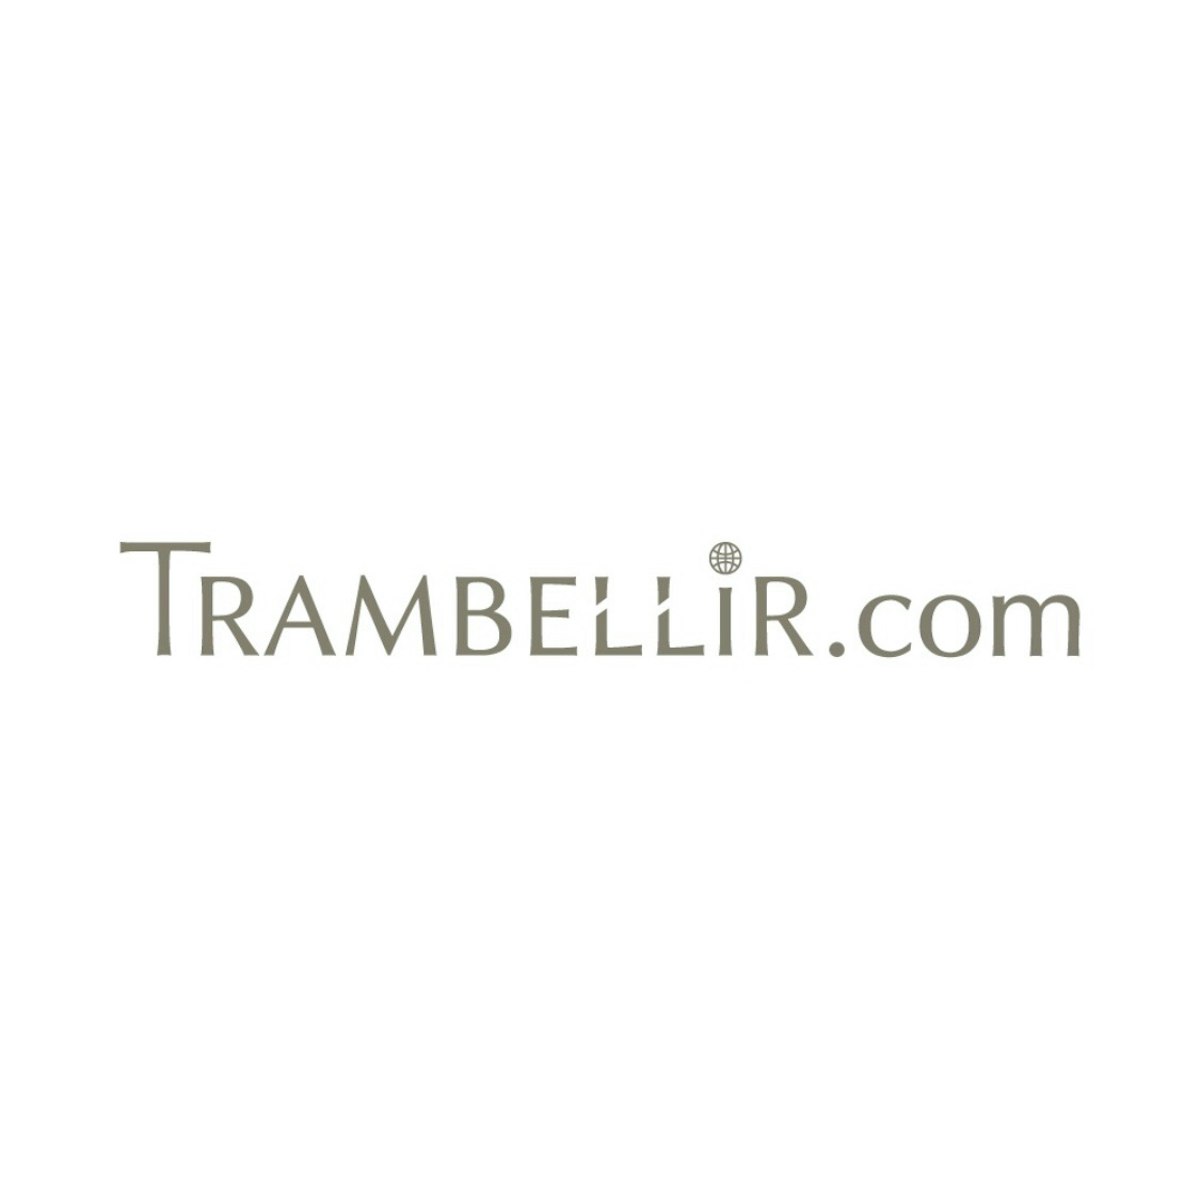 featured image - Startup Interview with So Iizuka, Trambellir's Co-Founder and CEO